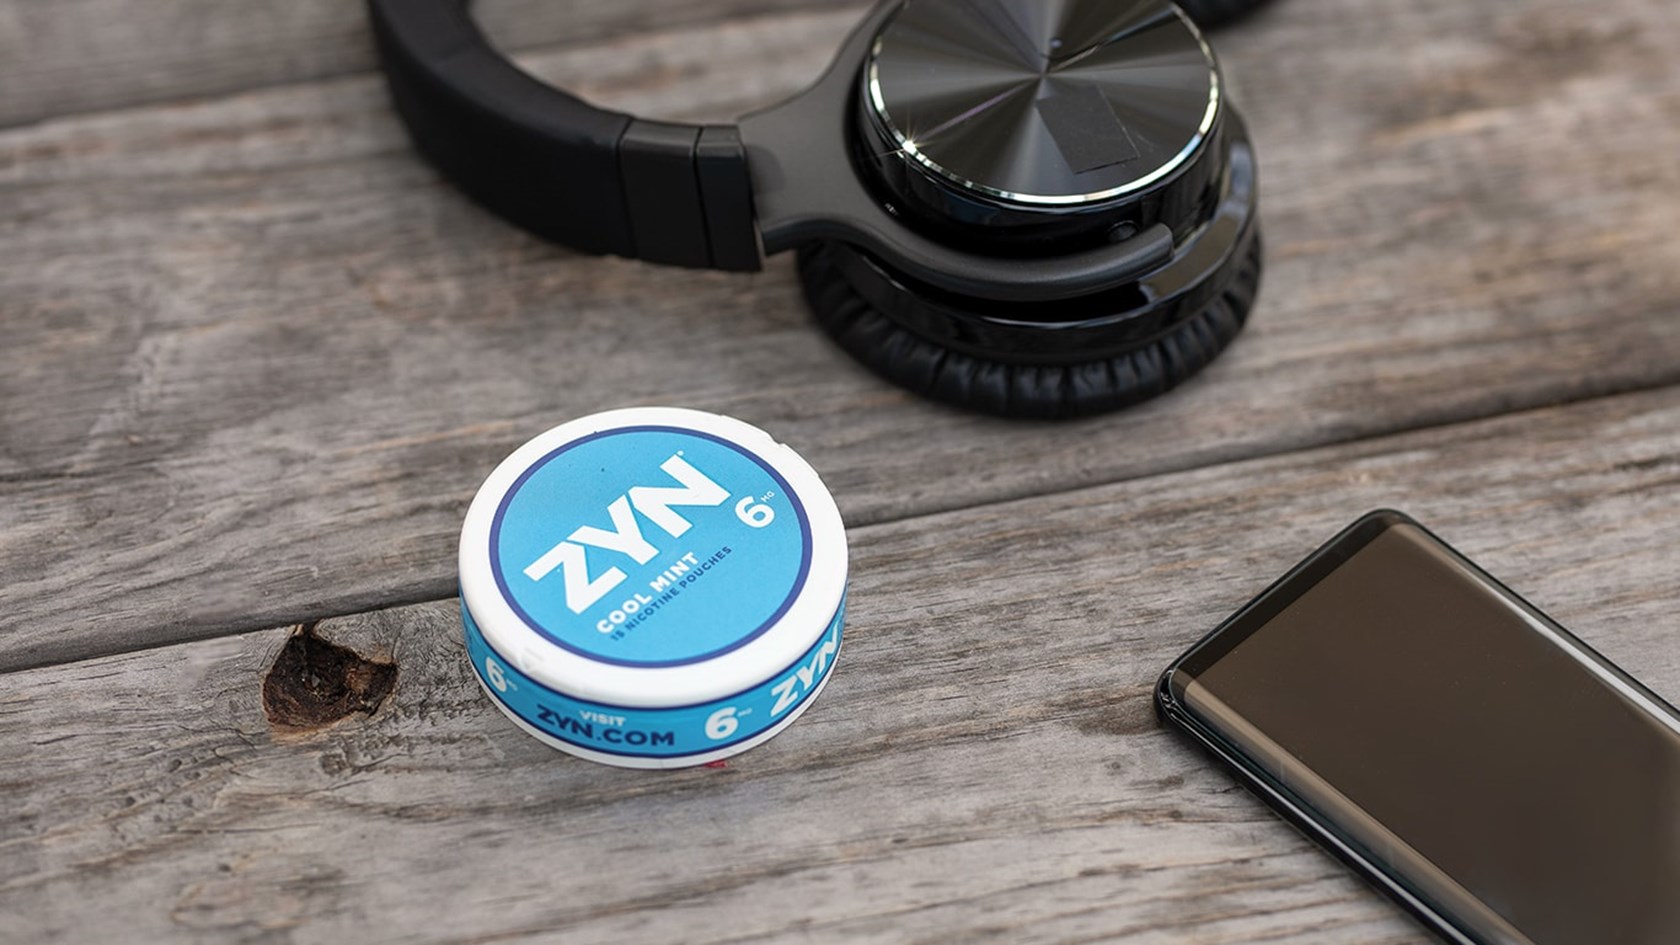 A can of Cool Mint ZYN Tobacco-Free Nicotine Pouches on a table next to a cell phone and headphones.